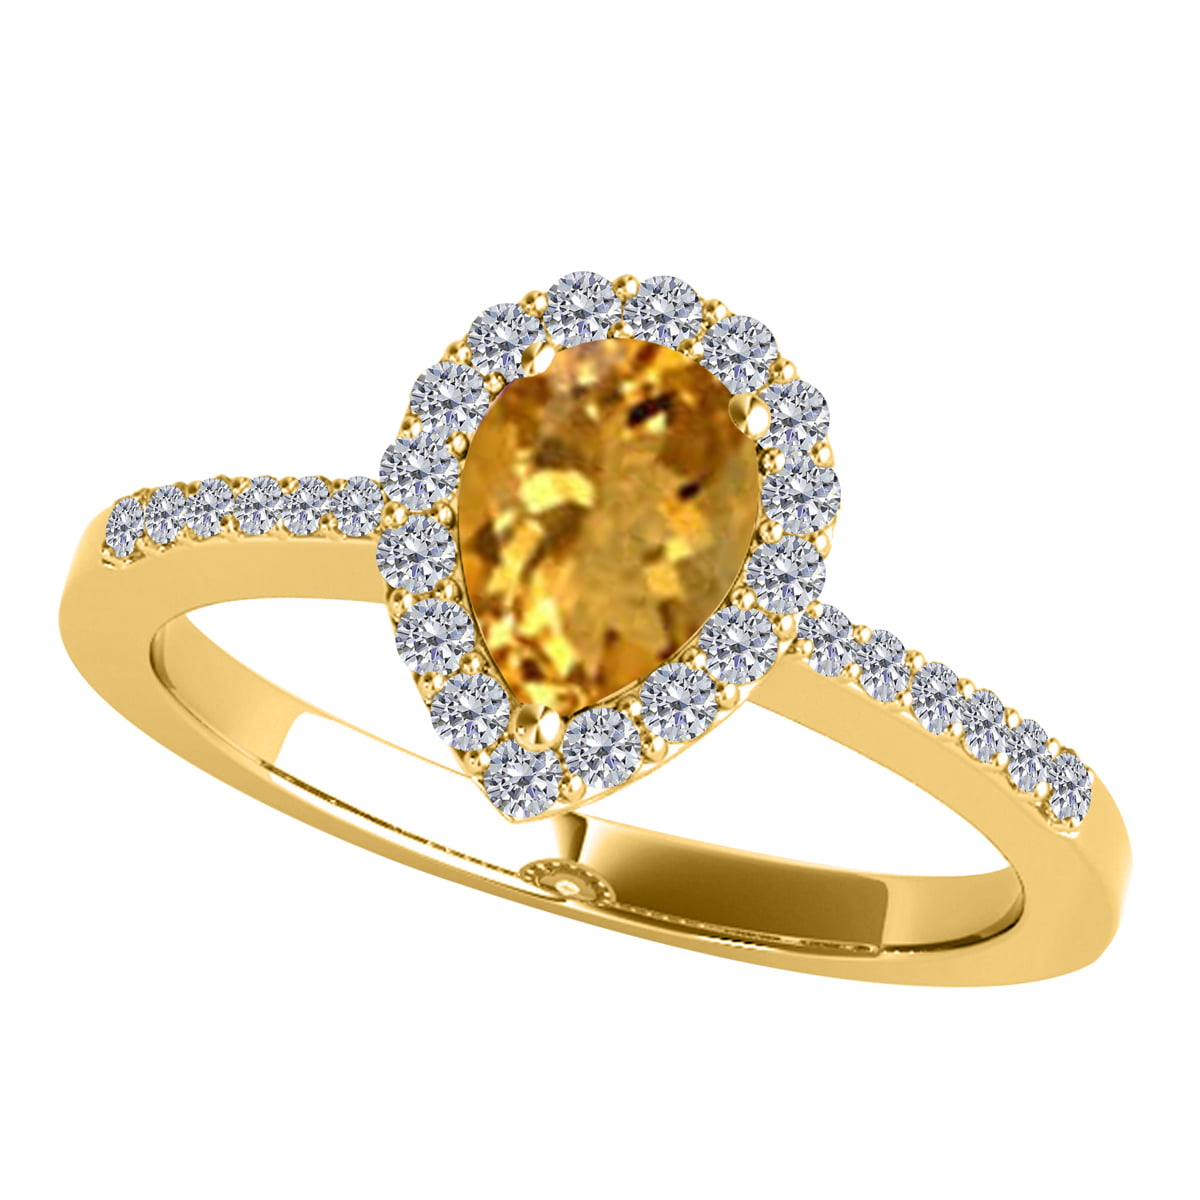 55Carat Natural Citrine 925 Silver Ring for Women Prong Cut Oval Shape Birthstone Size 5,6,7,8,9,10,11,12 